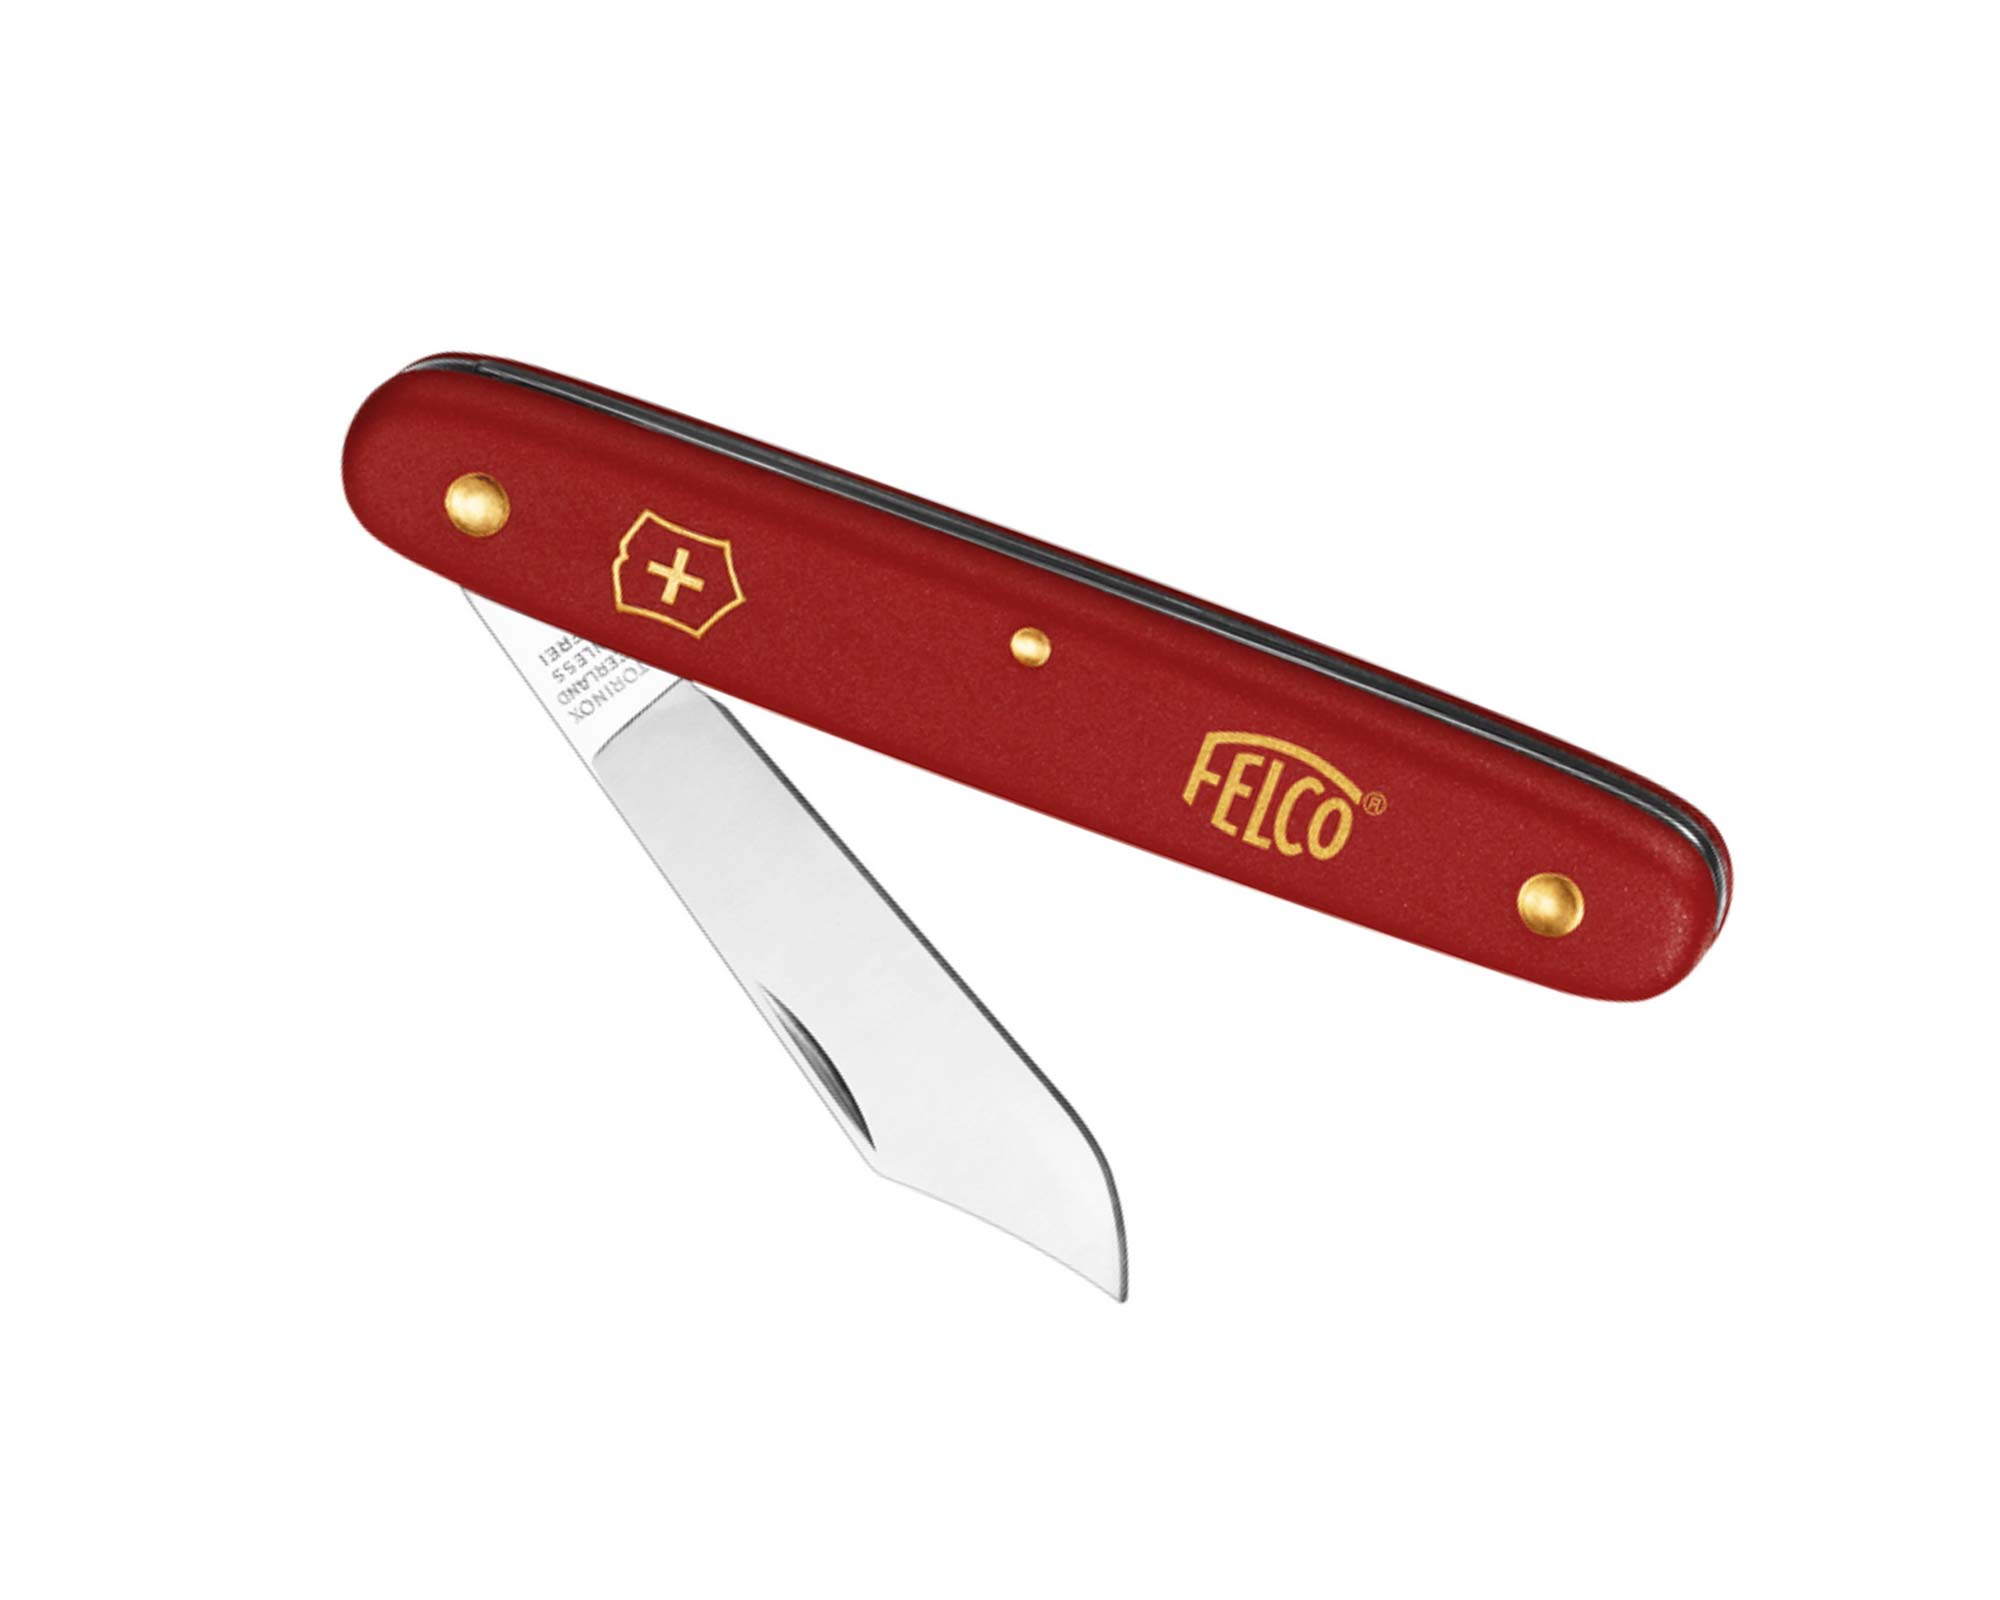 Light Grafting and Pruning Knife - Felco F39010